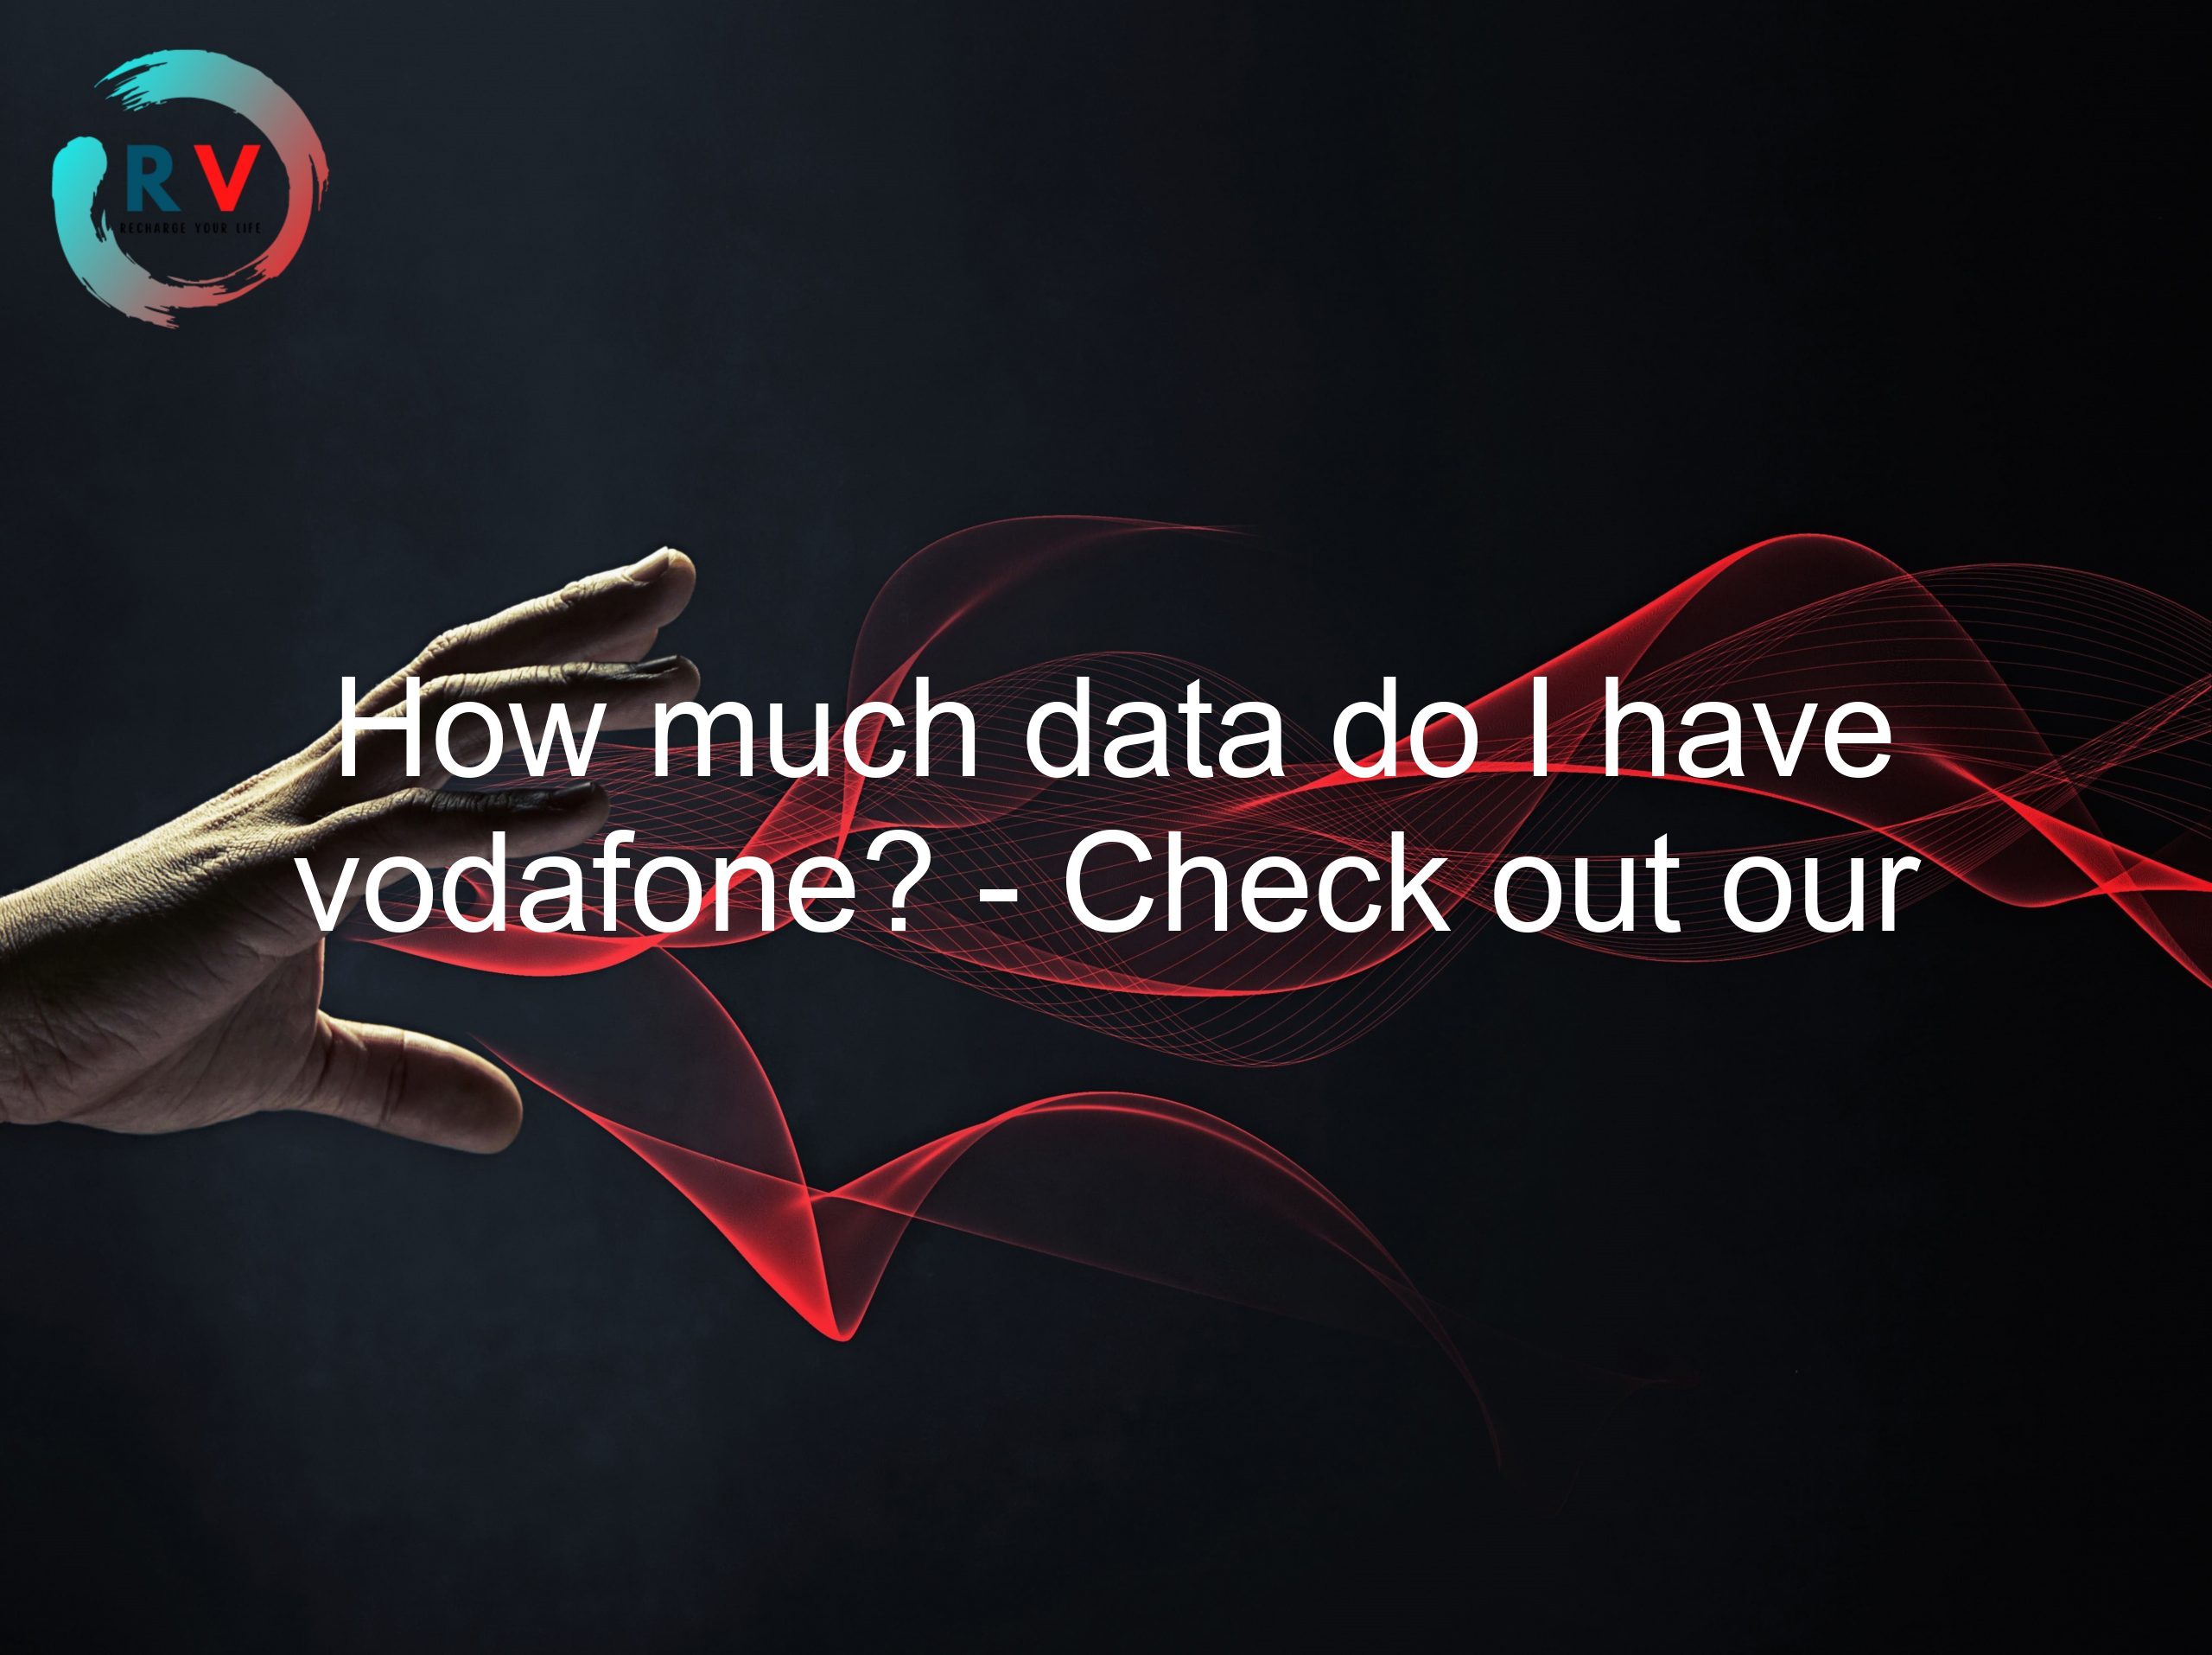 How much data do I have vodafone? - Check out our guide to find out